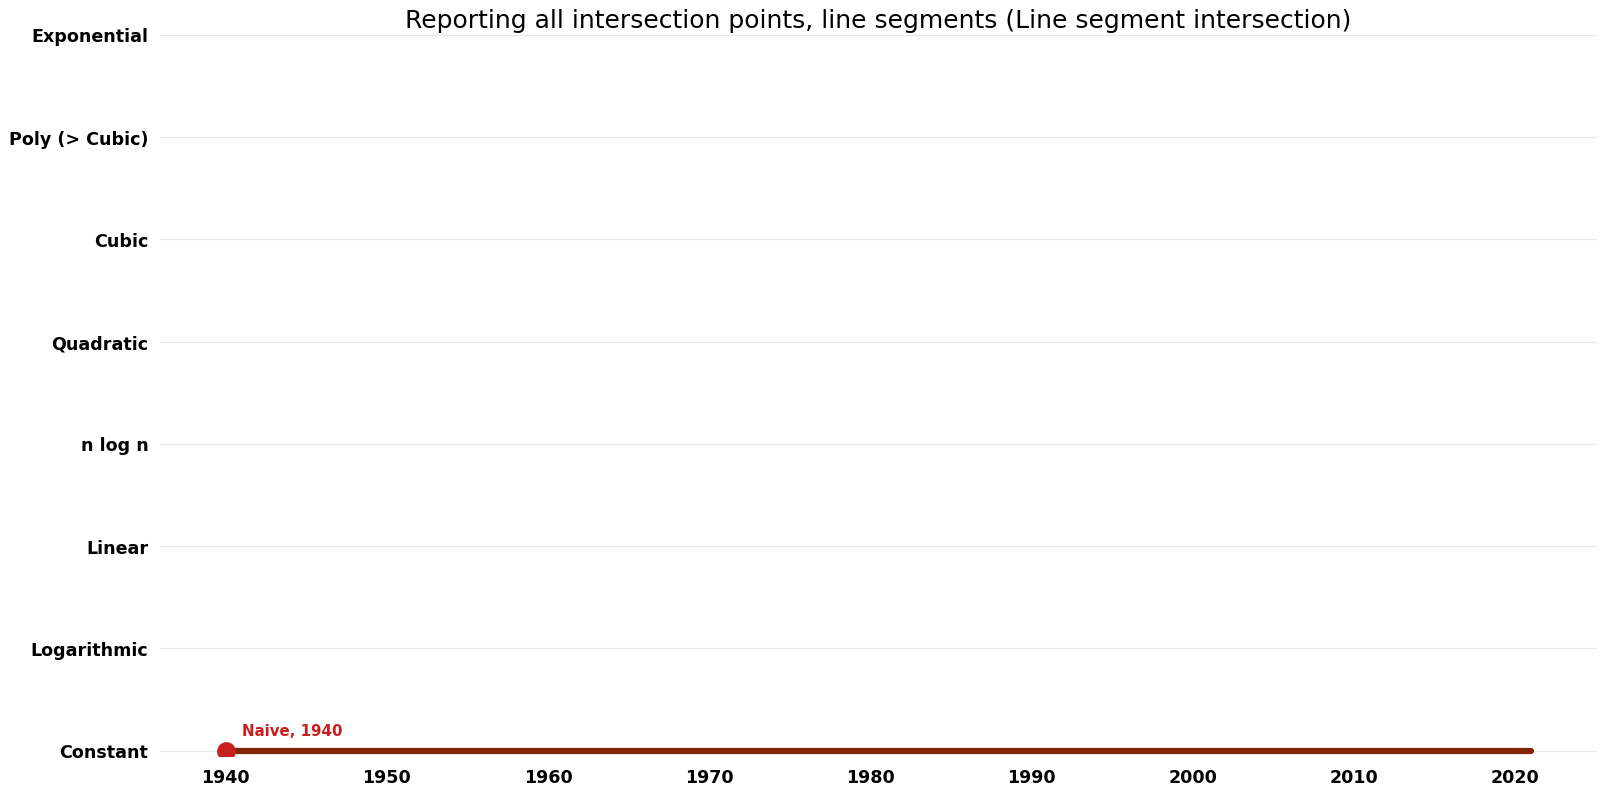 Line segment intersection - Reporting all intersection points, line segments - Space.png